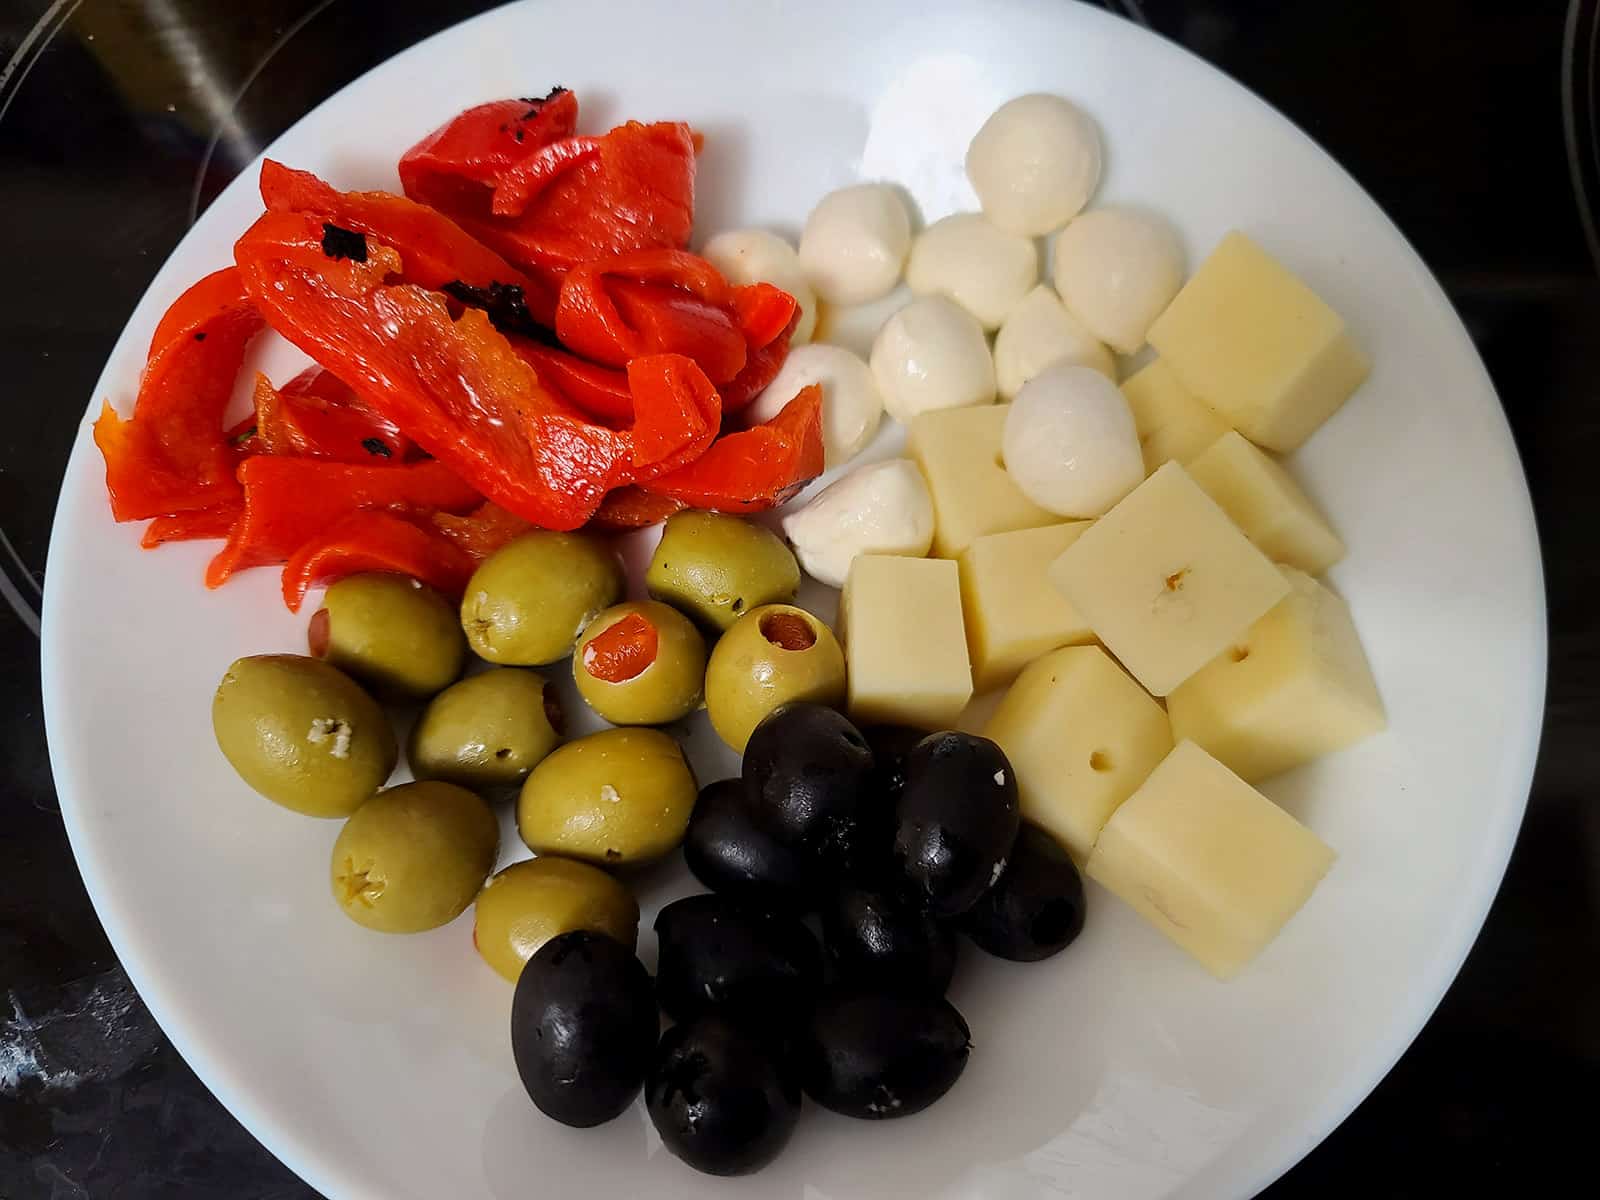 A bowl of drained olives, roasted red peppers, and cheeses.